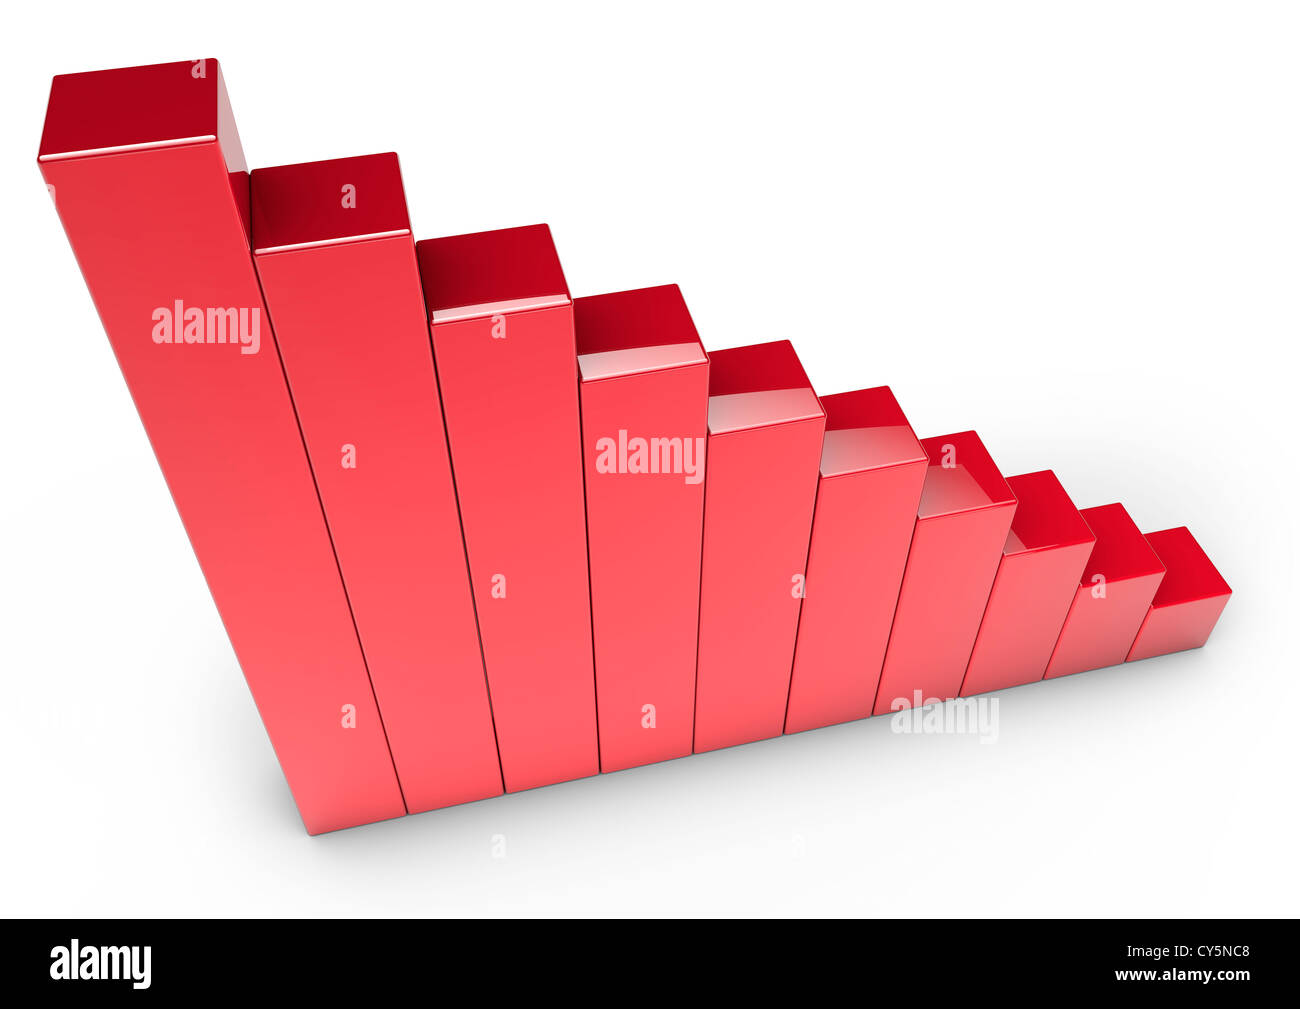 3D render of a series of red shiny blocks forming a descending graph - Concept image Stock Photo